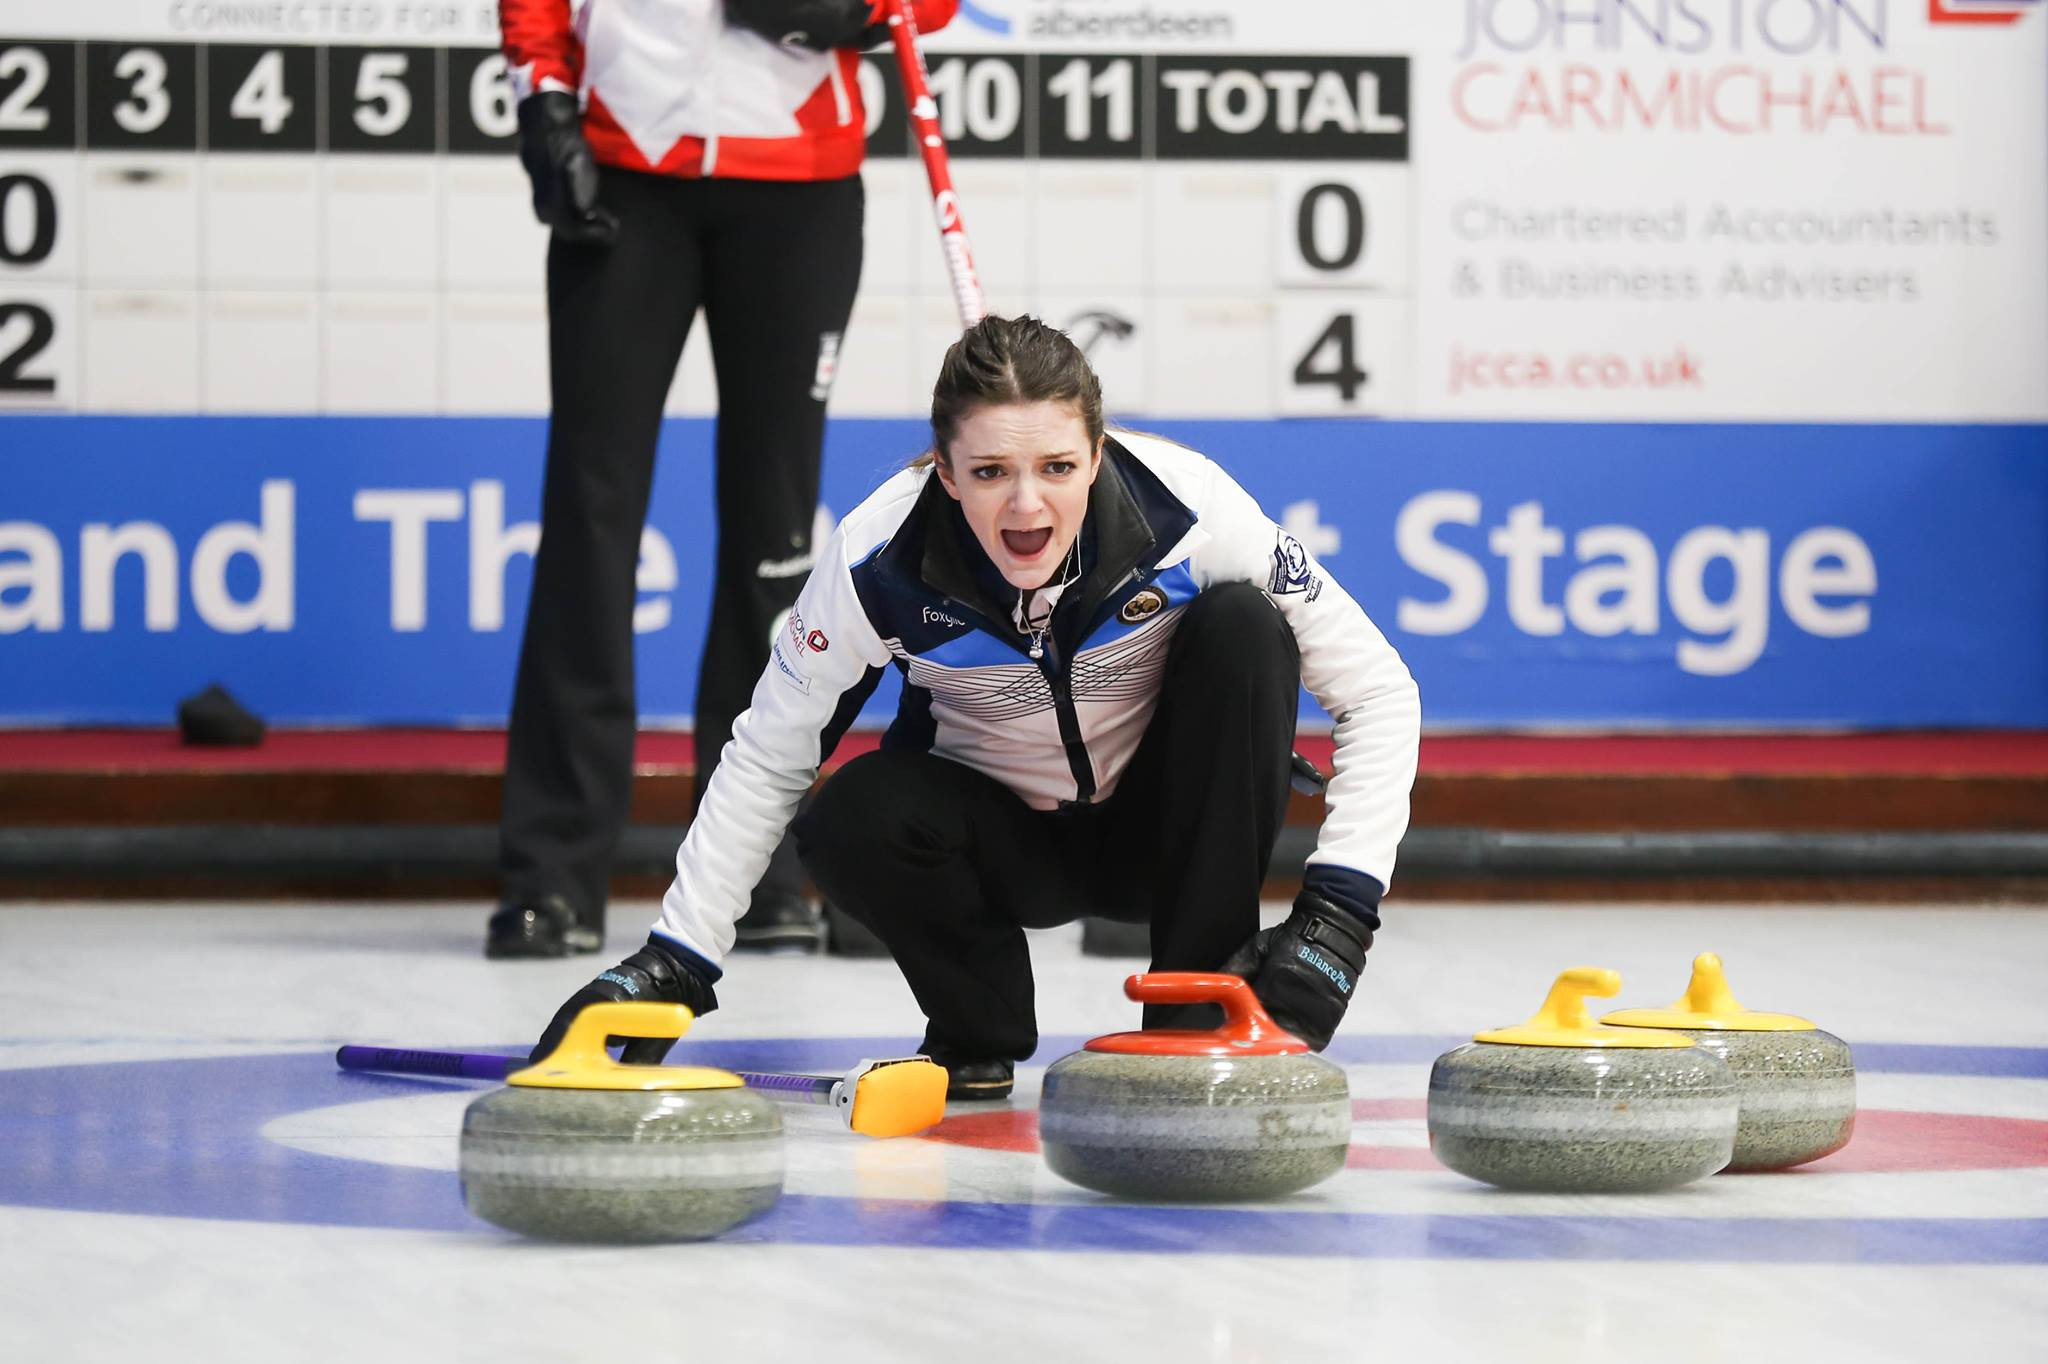 Round-robin action continued today at the World Junior Curling Championships ©WCF